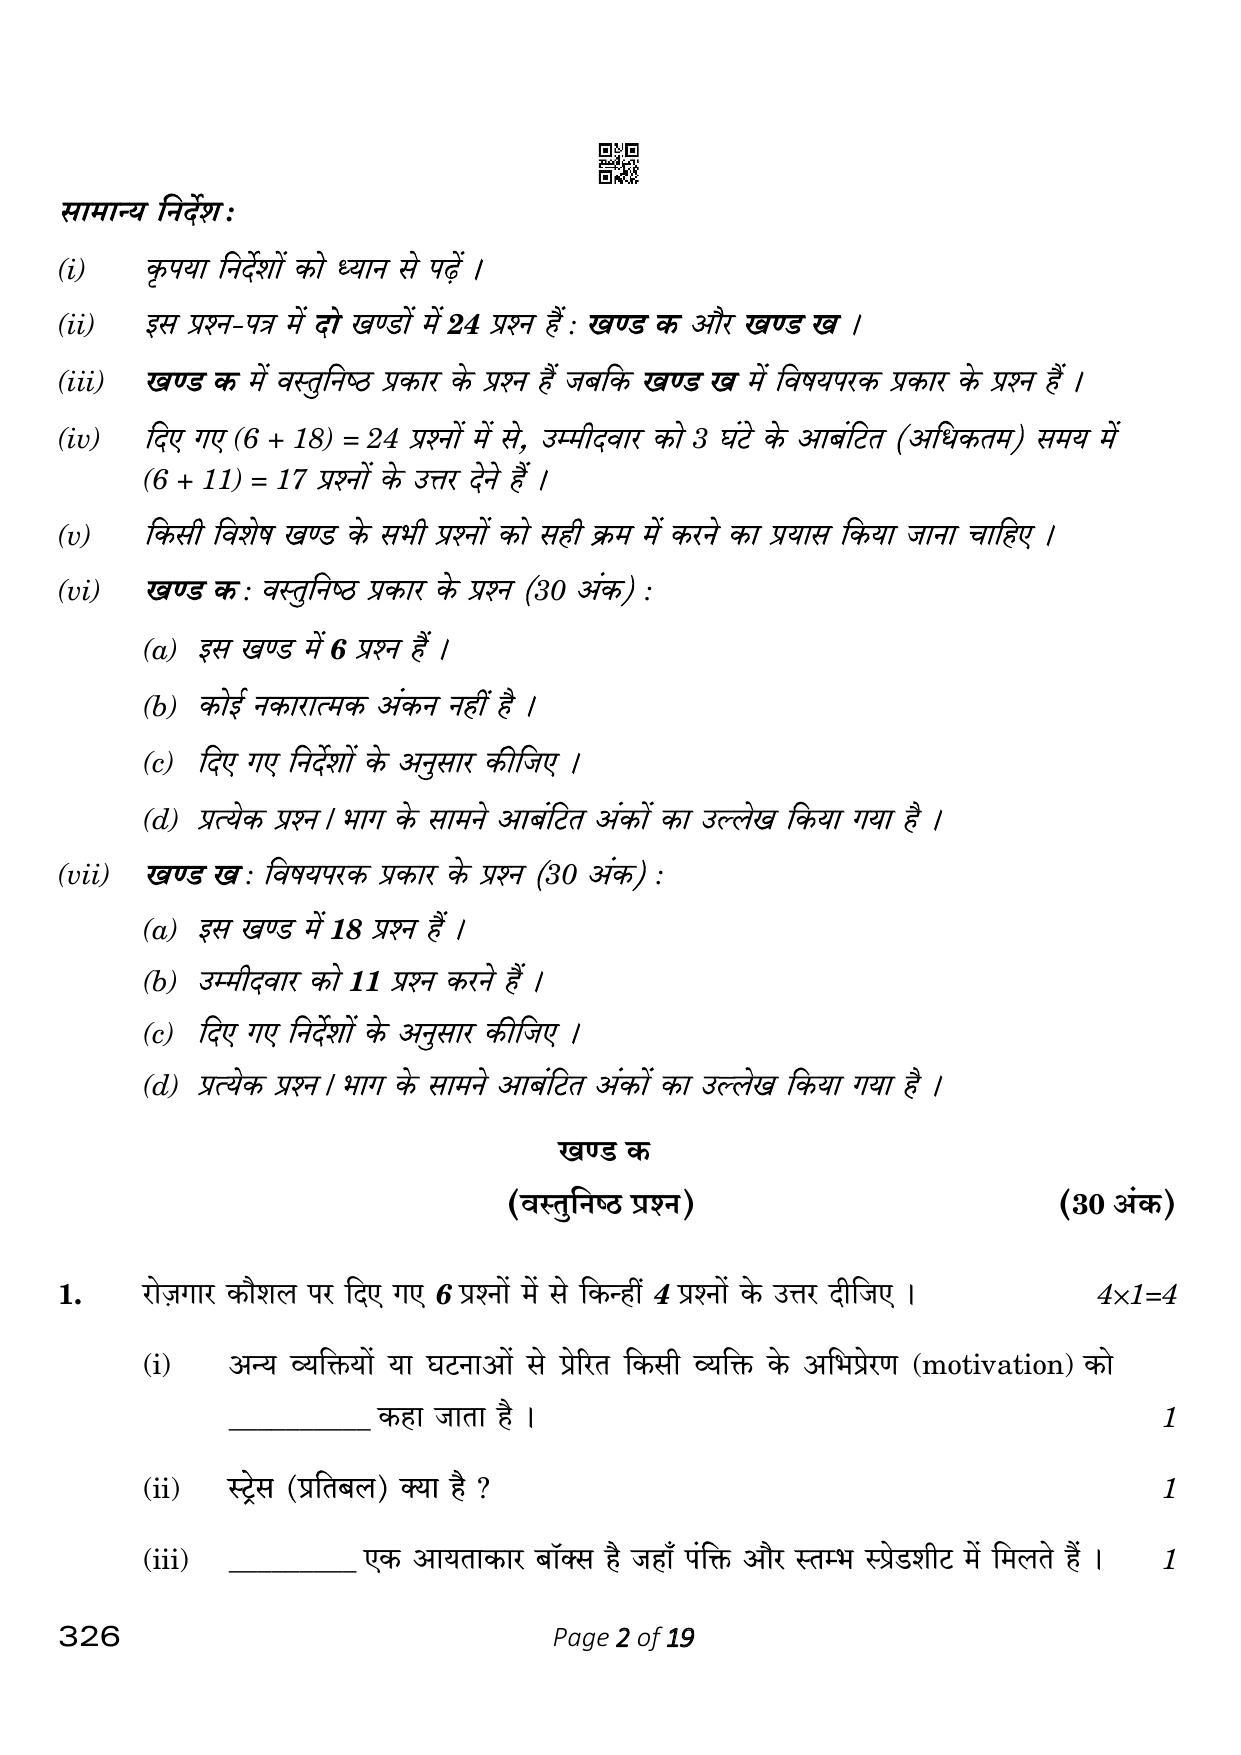 CBSE Class 12 326_Information Technology 2023 Question Paper - Page 2